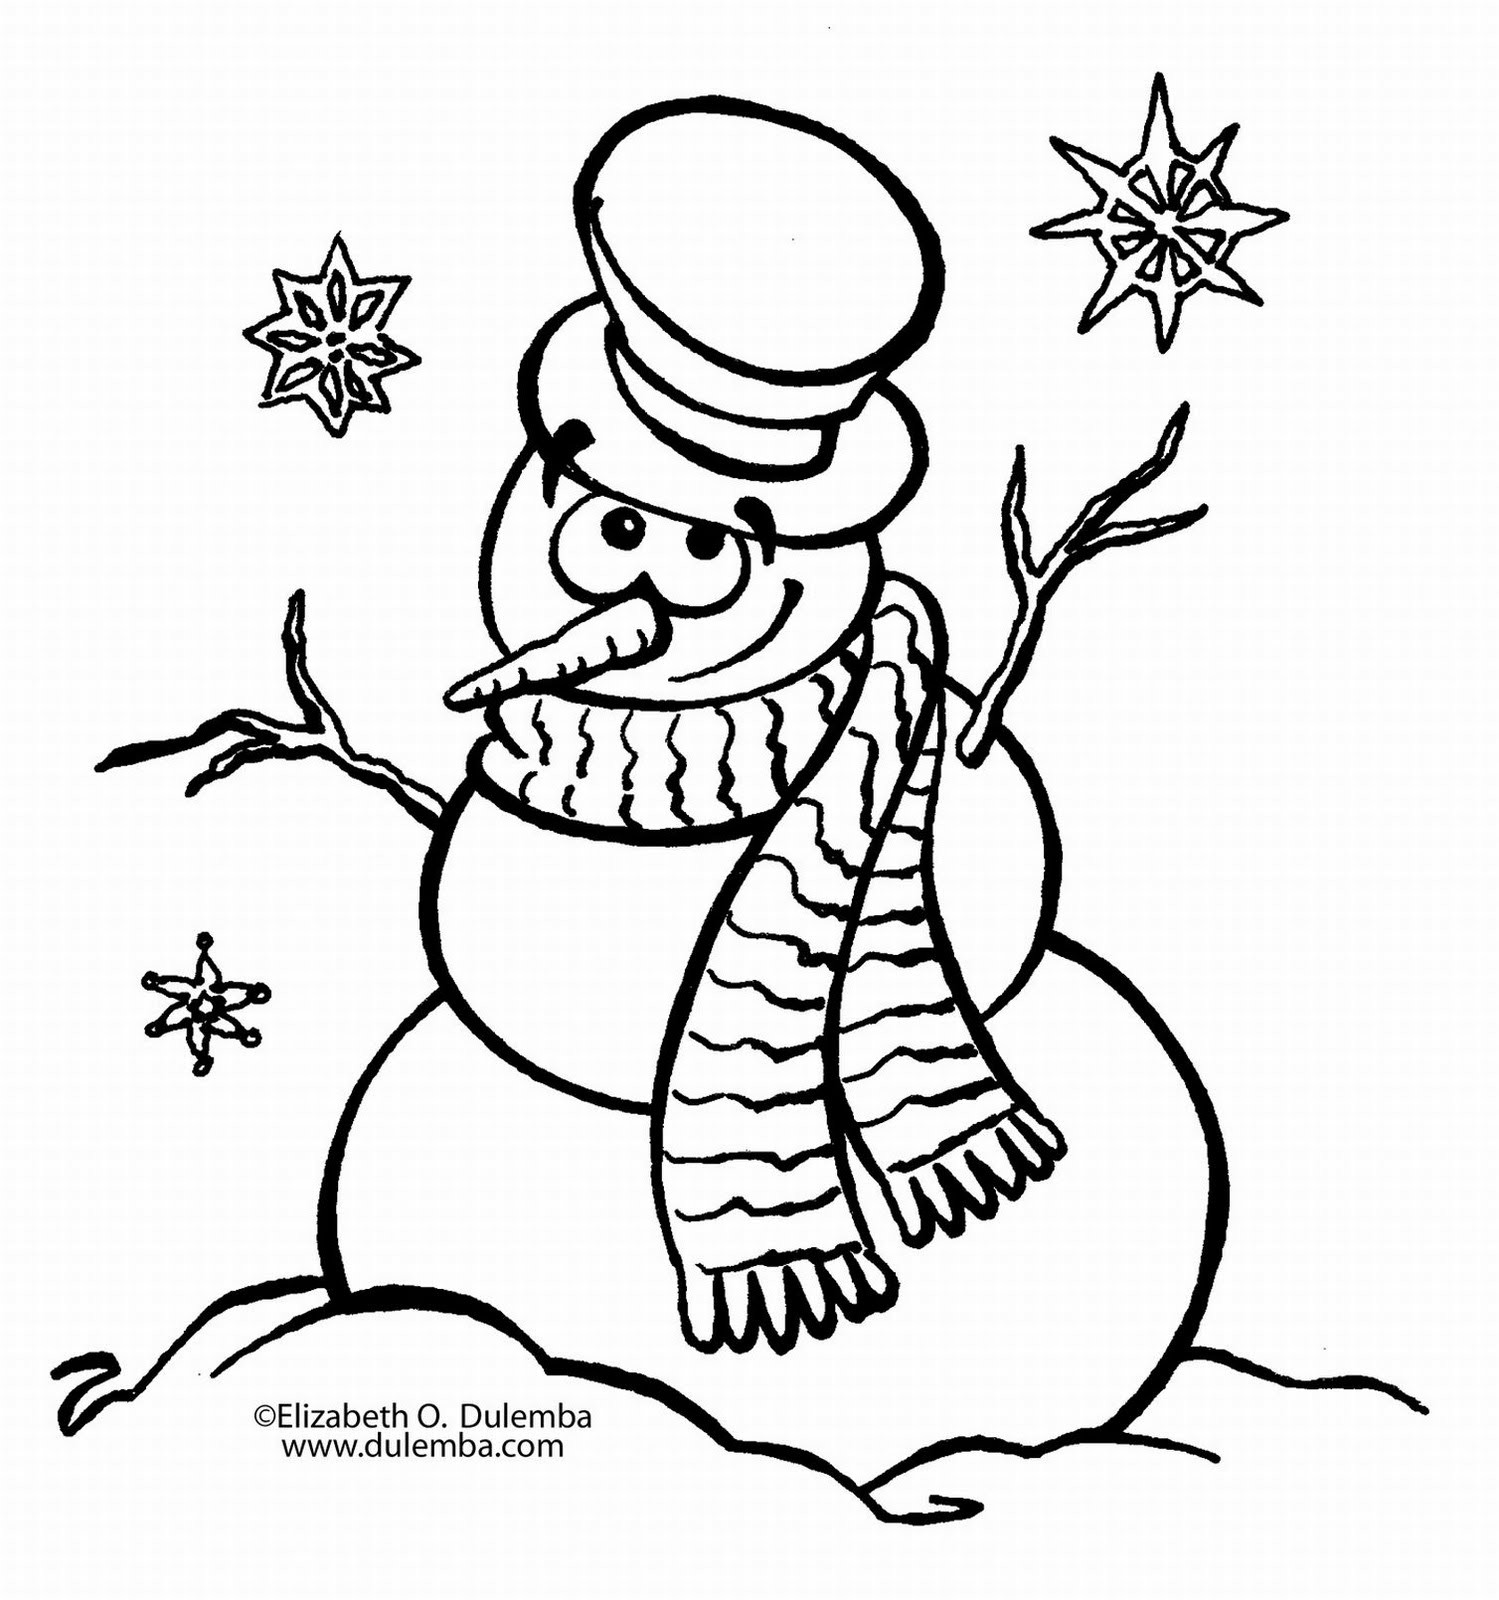 Snowman Coloring Pages Printable
 New Year Coloring Pages